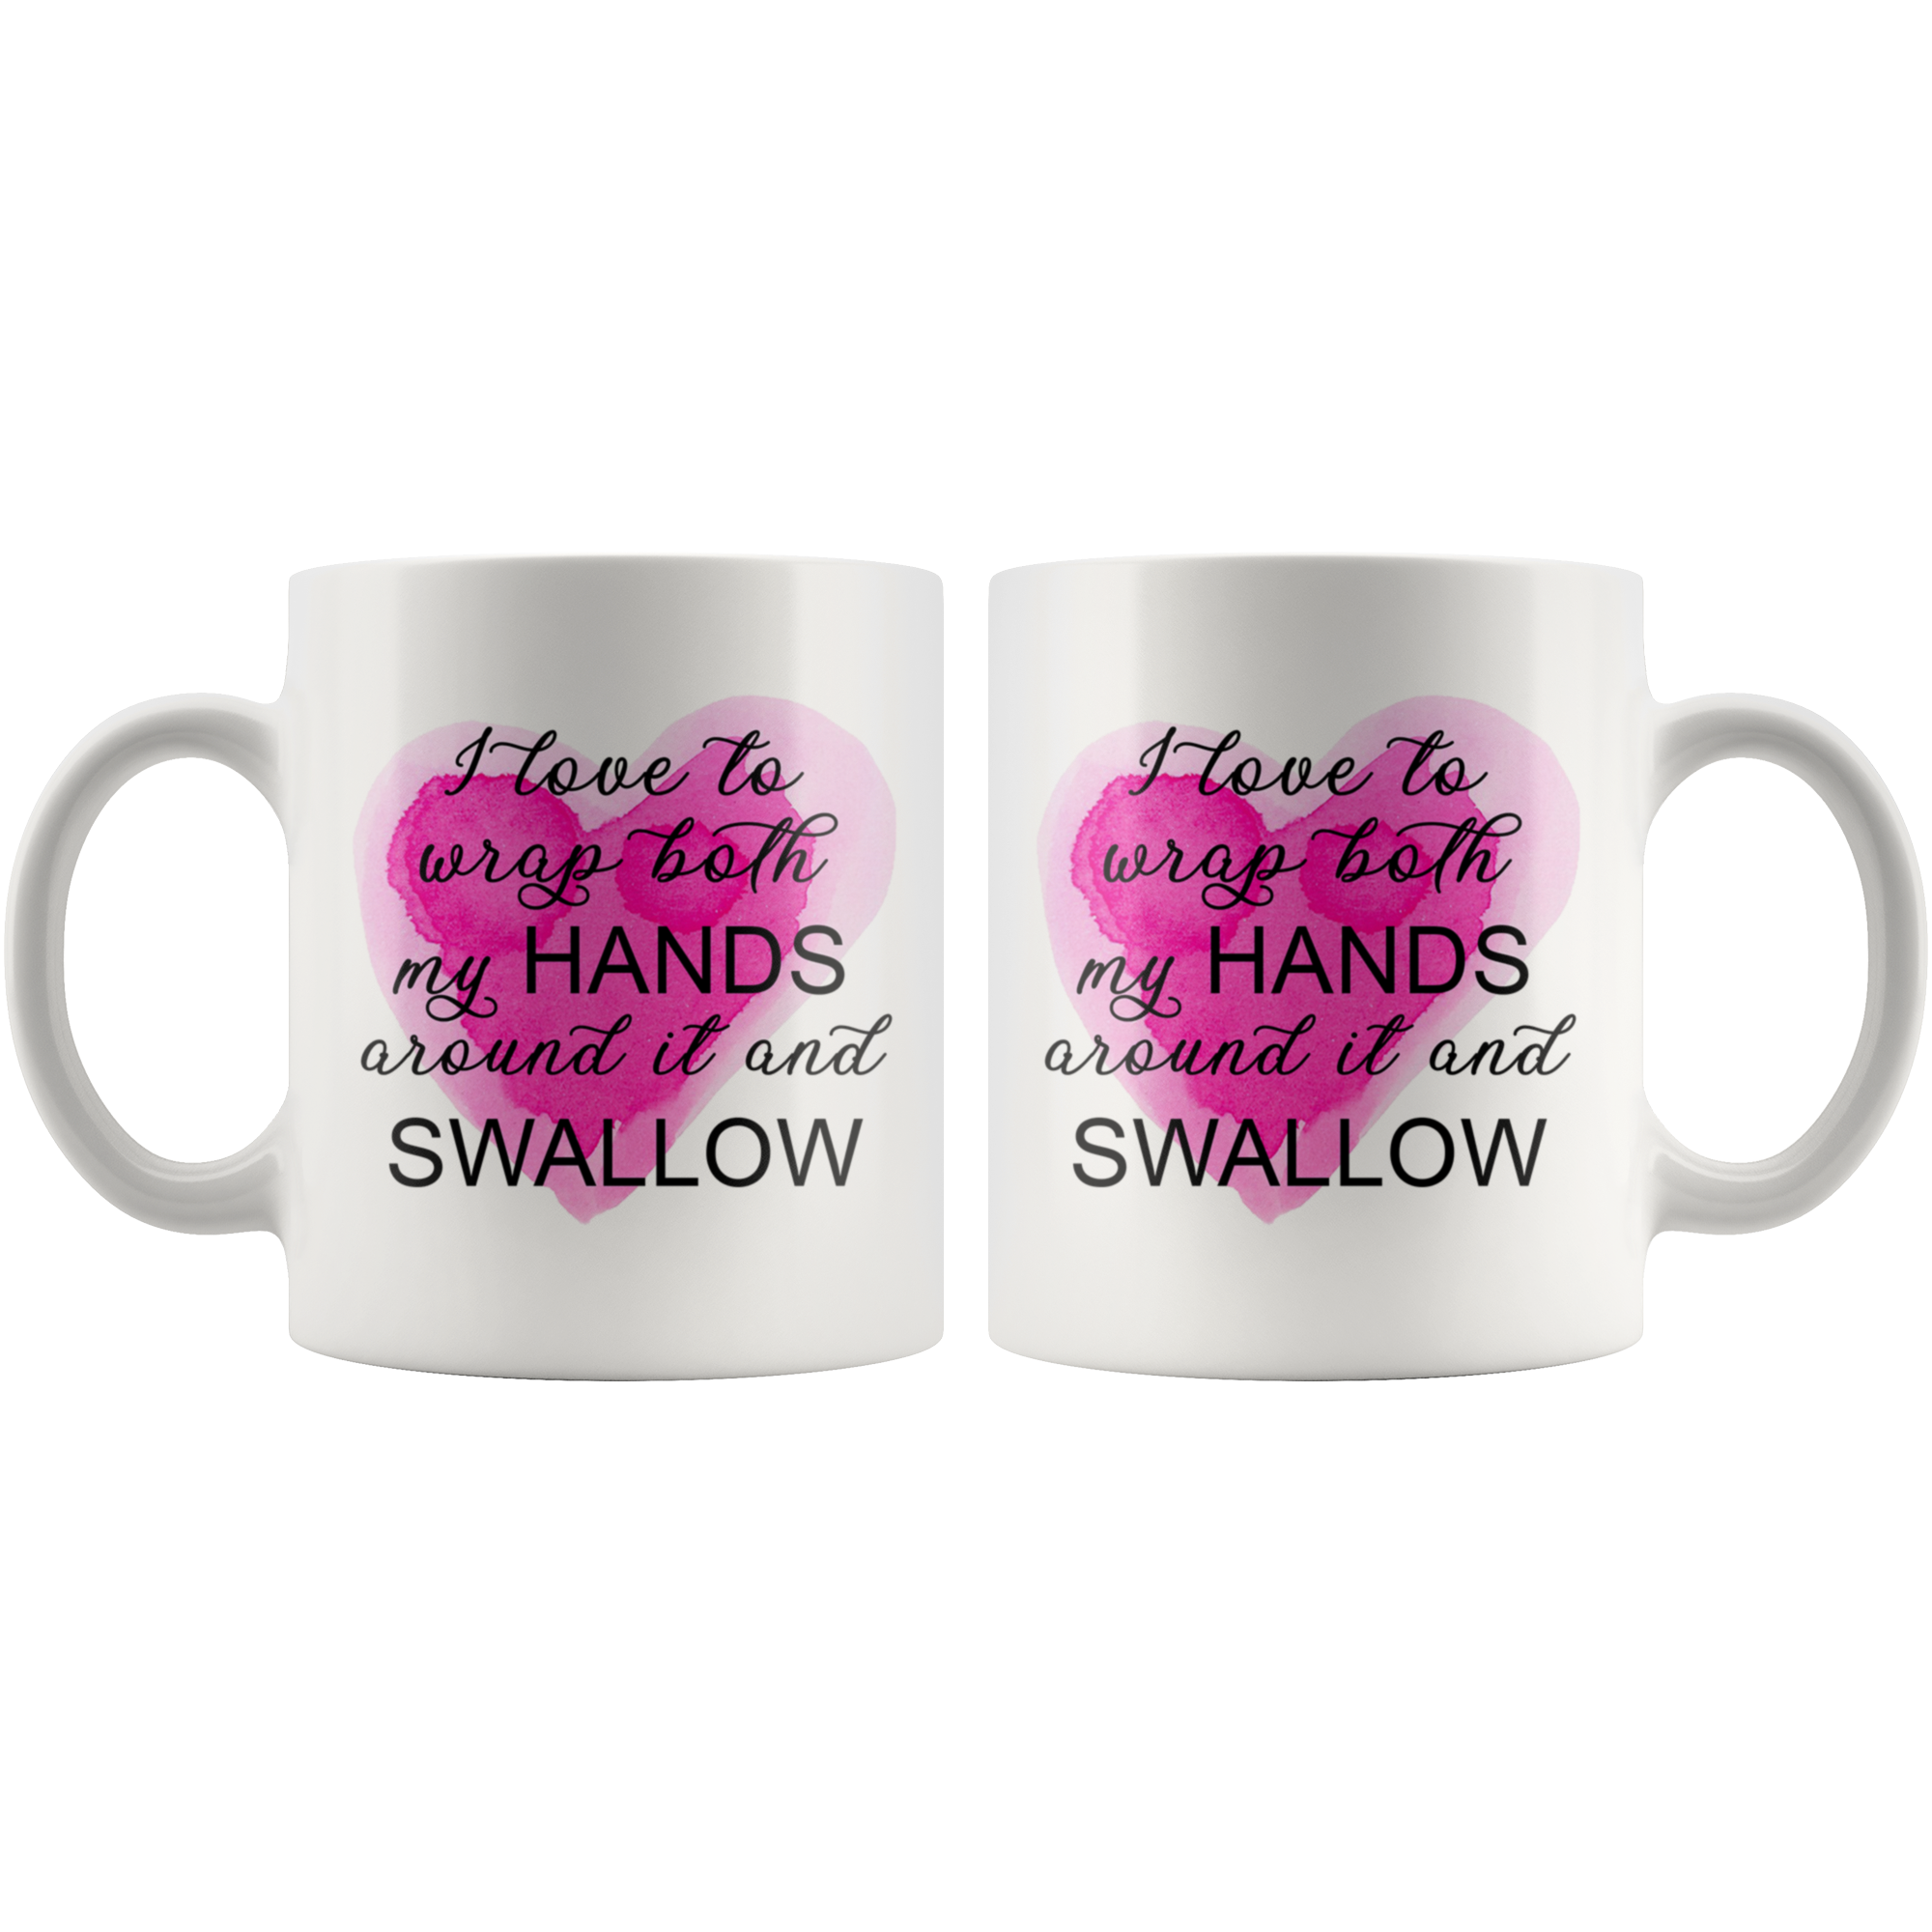 Naughty Bachelorette Gifts - Funny Gag Gifts for Women - I Love To Wrap  Both My Hands Around It and Swallow Wine Glass